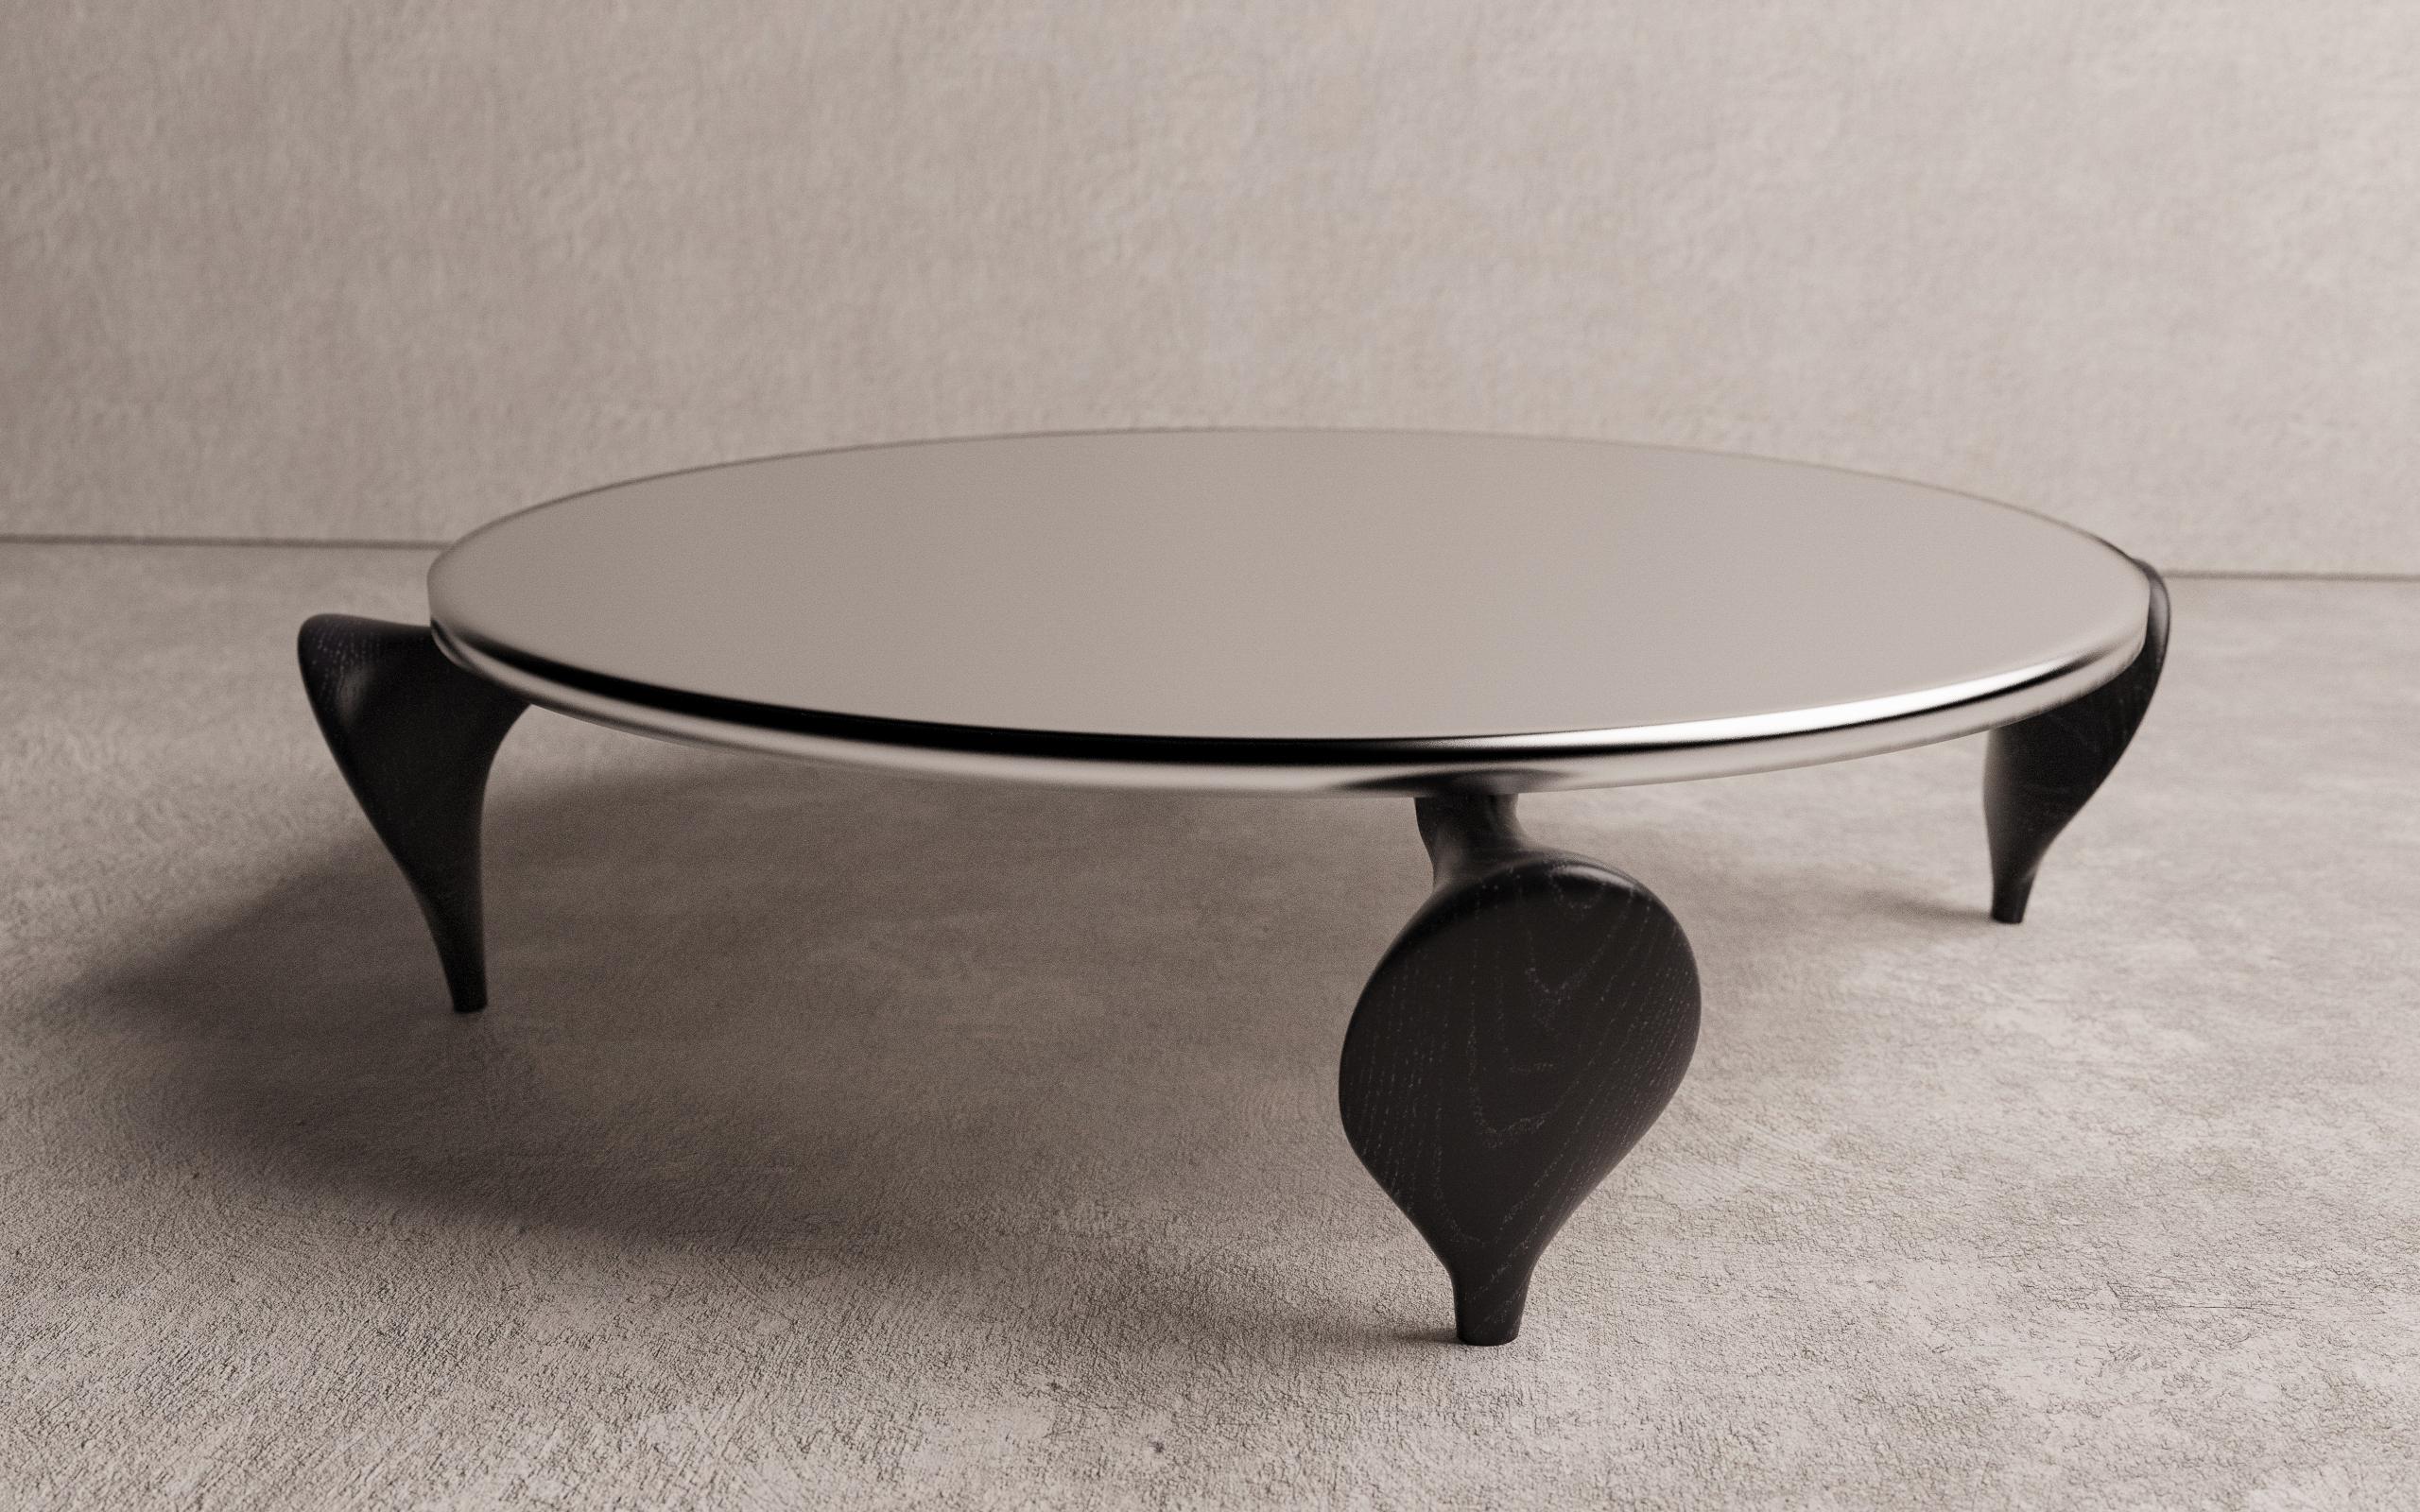 The Aryota Coffee table by Christopher Mark is a hand crafted one of one piece. Christopher was inspired by the contrast of a shape imbedded in a rocky outcropping near the 7/8 shop. The top of the coffee table is made of aluminum with a sandblasted